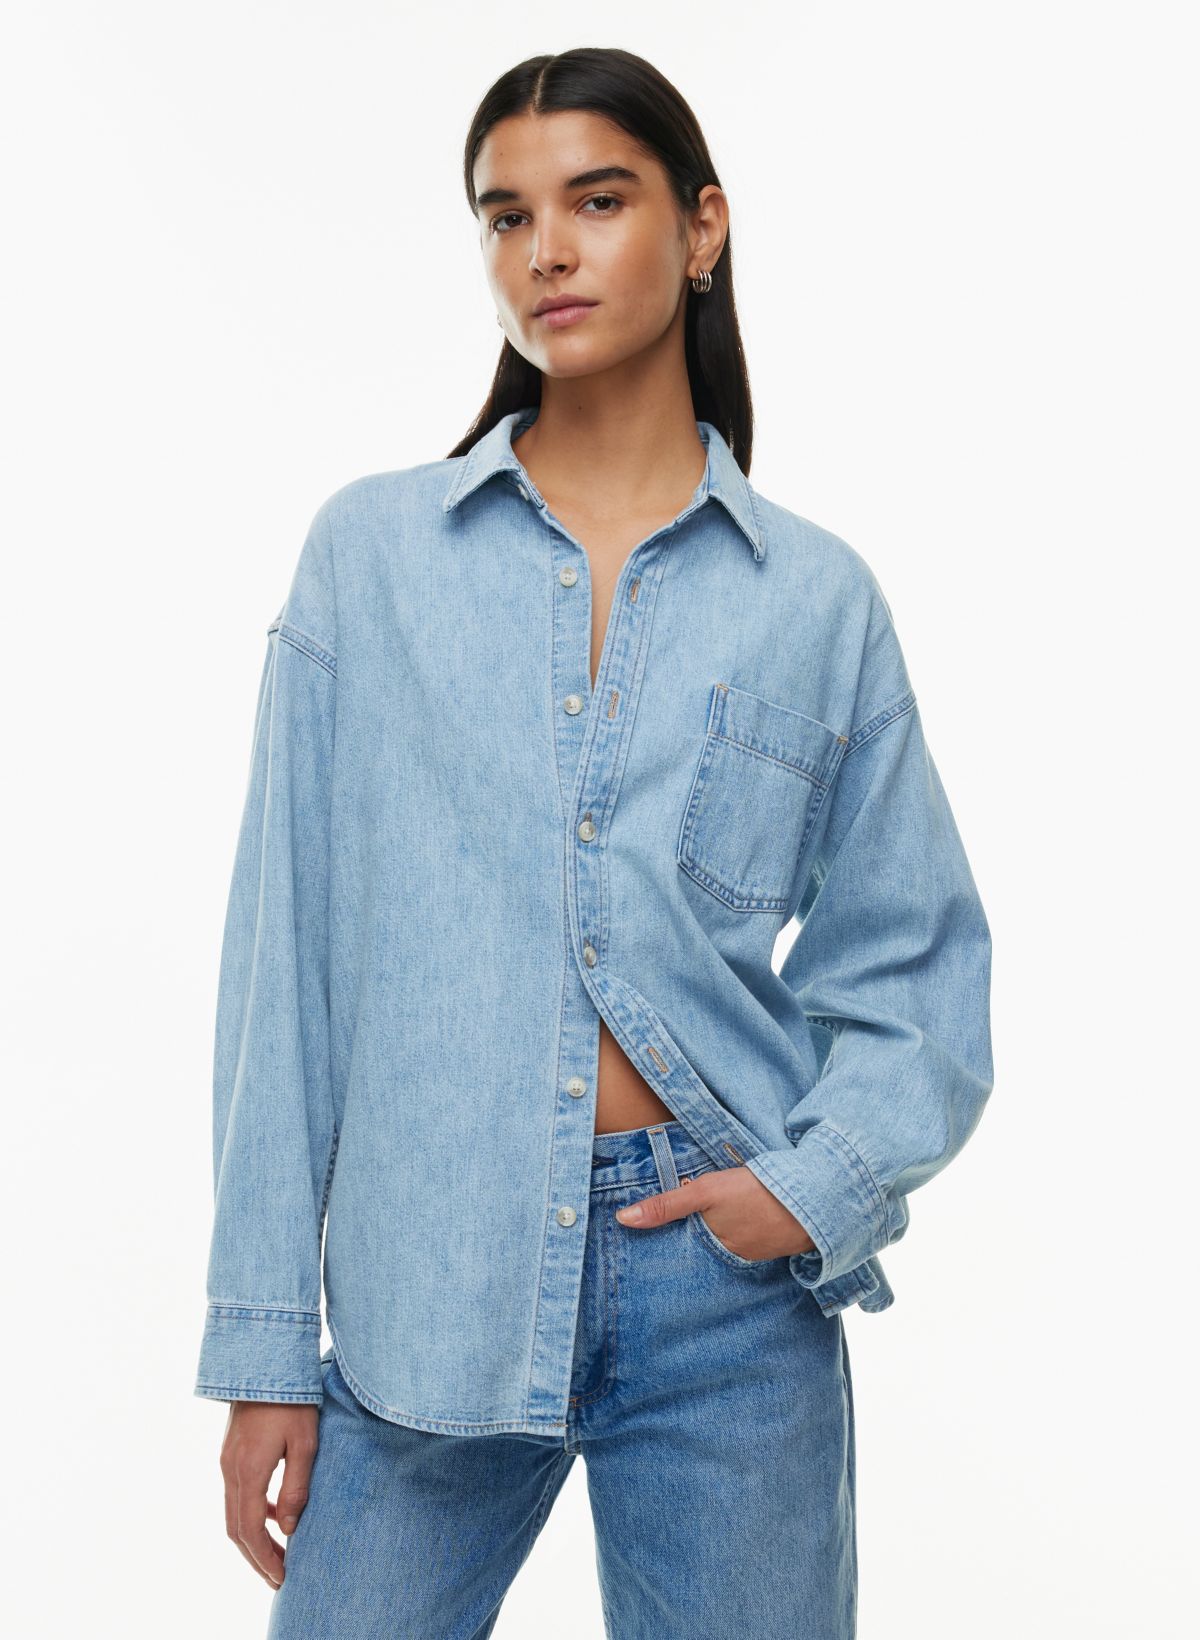 Buy Denim Solid Women Top Cotton for Best Price, Reviews, Free